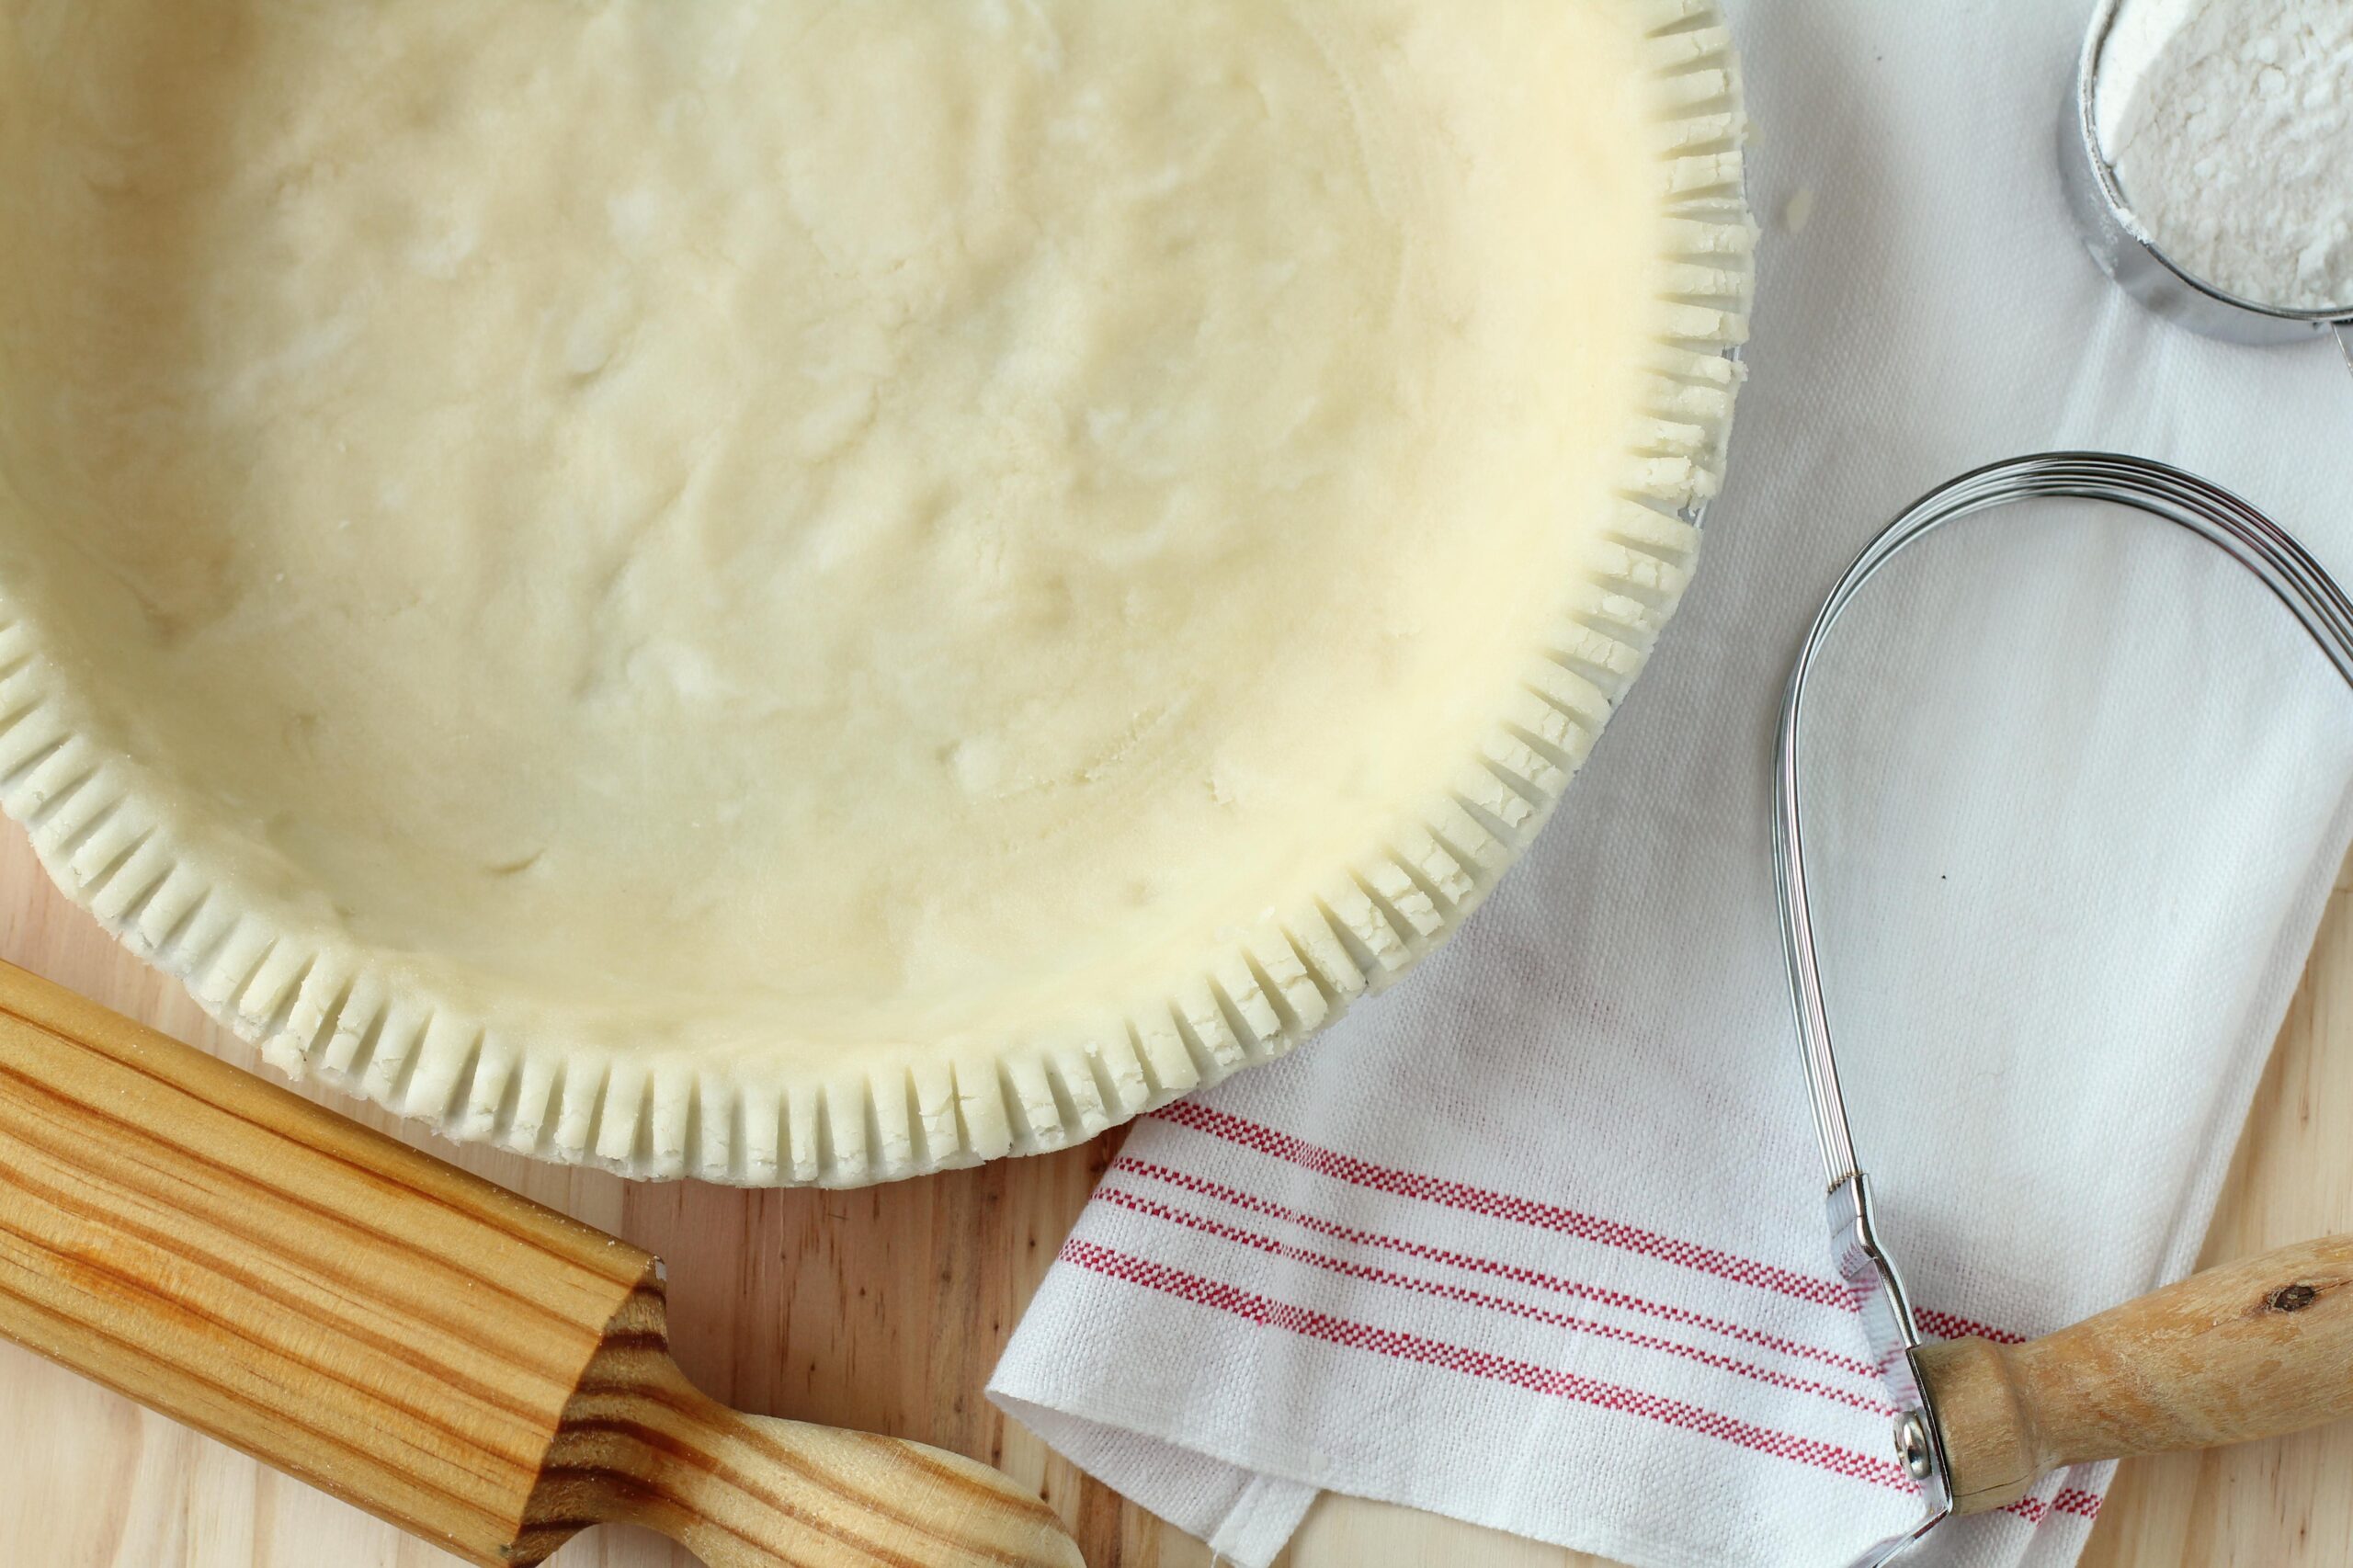  Make your homemade pie look like it came from a bakery with this crust